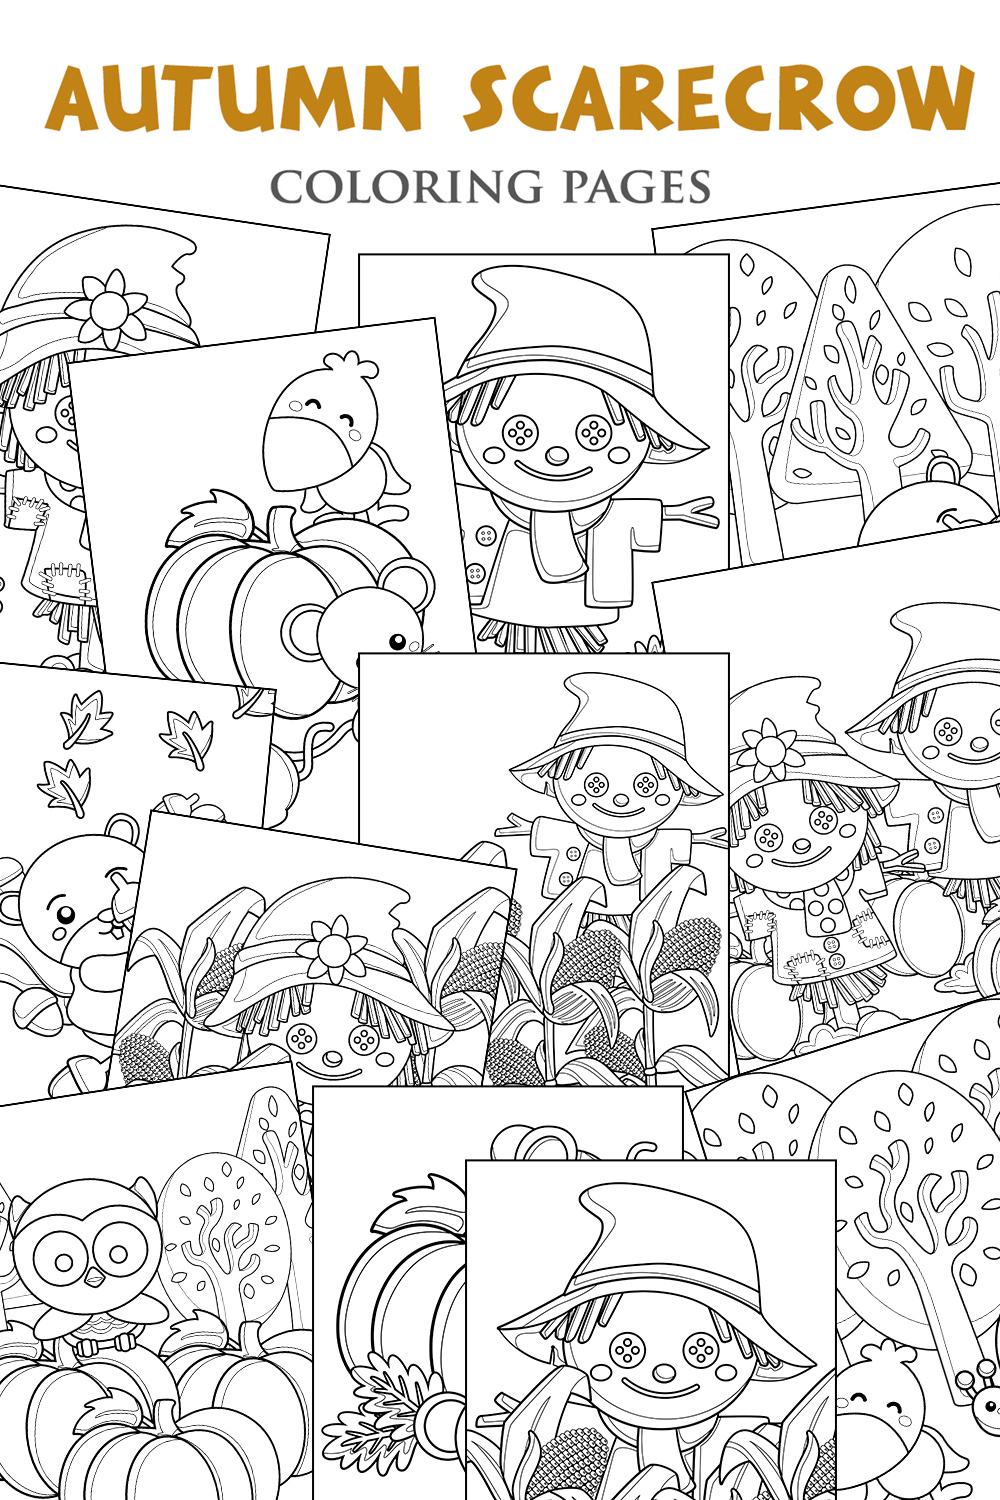 Funny Cartoon Autumn Fall Farm Scarecrow with Animals Bird Mouse Owl Raven Beaver Nature Tree Forest Coloring Pages for Kids and Adult pinterest preview image.